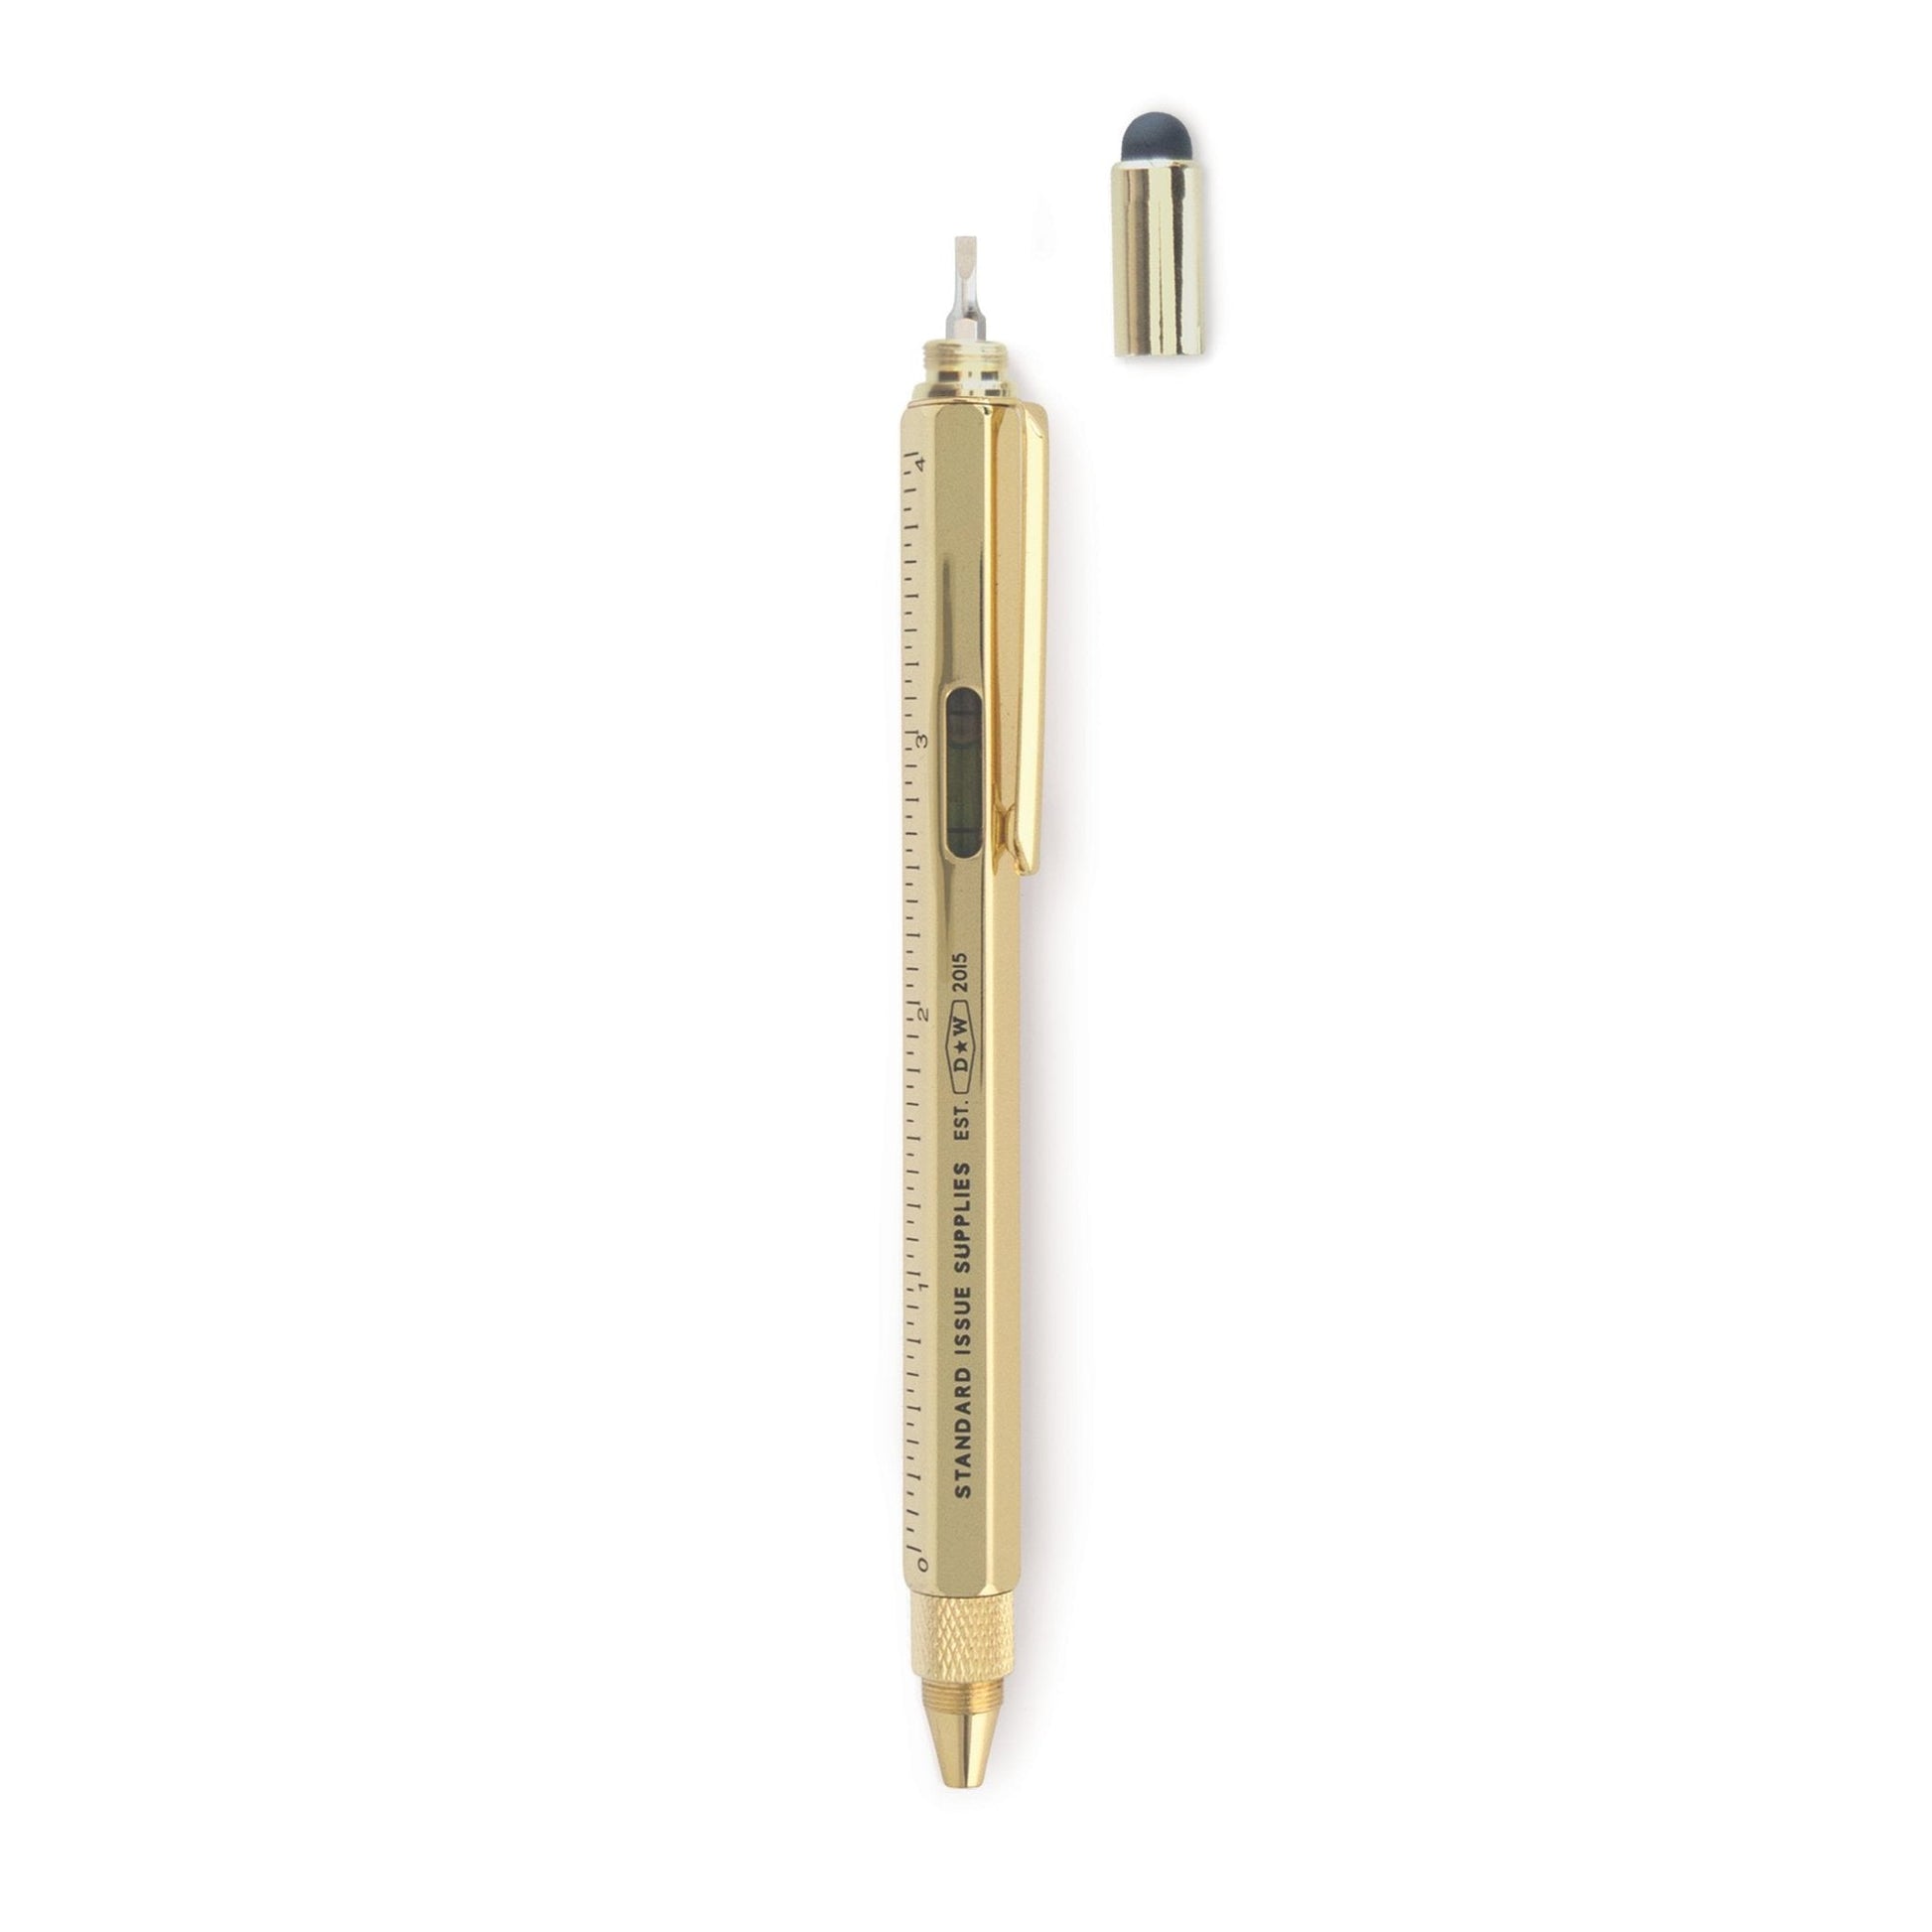 Gold pen with lid off